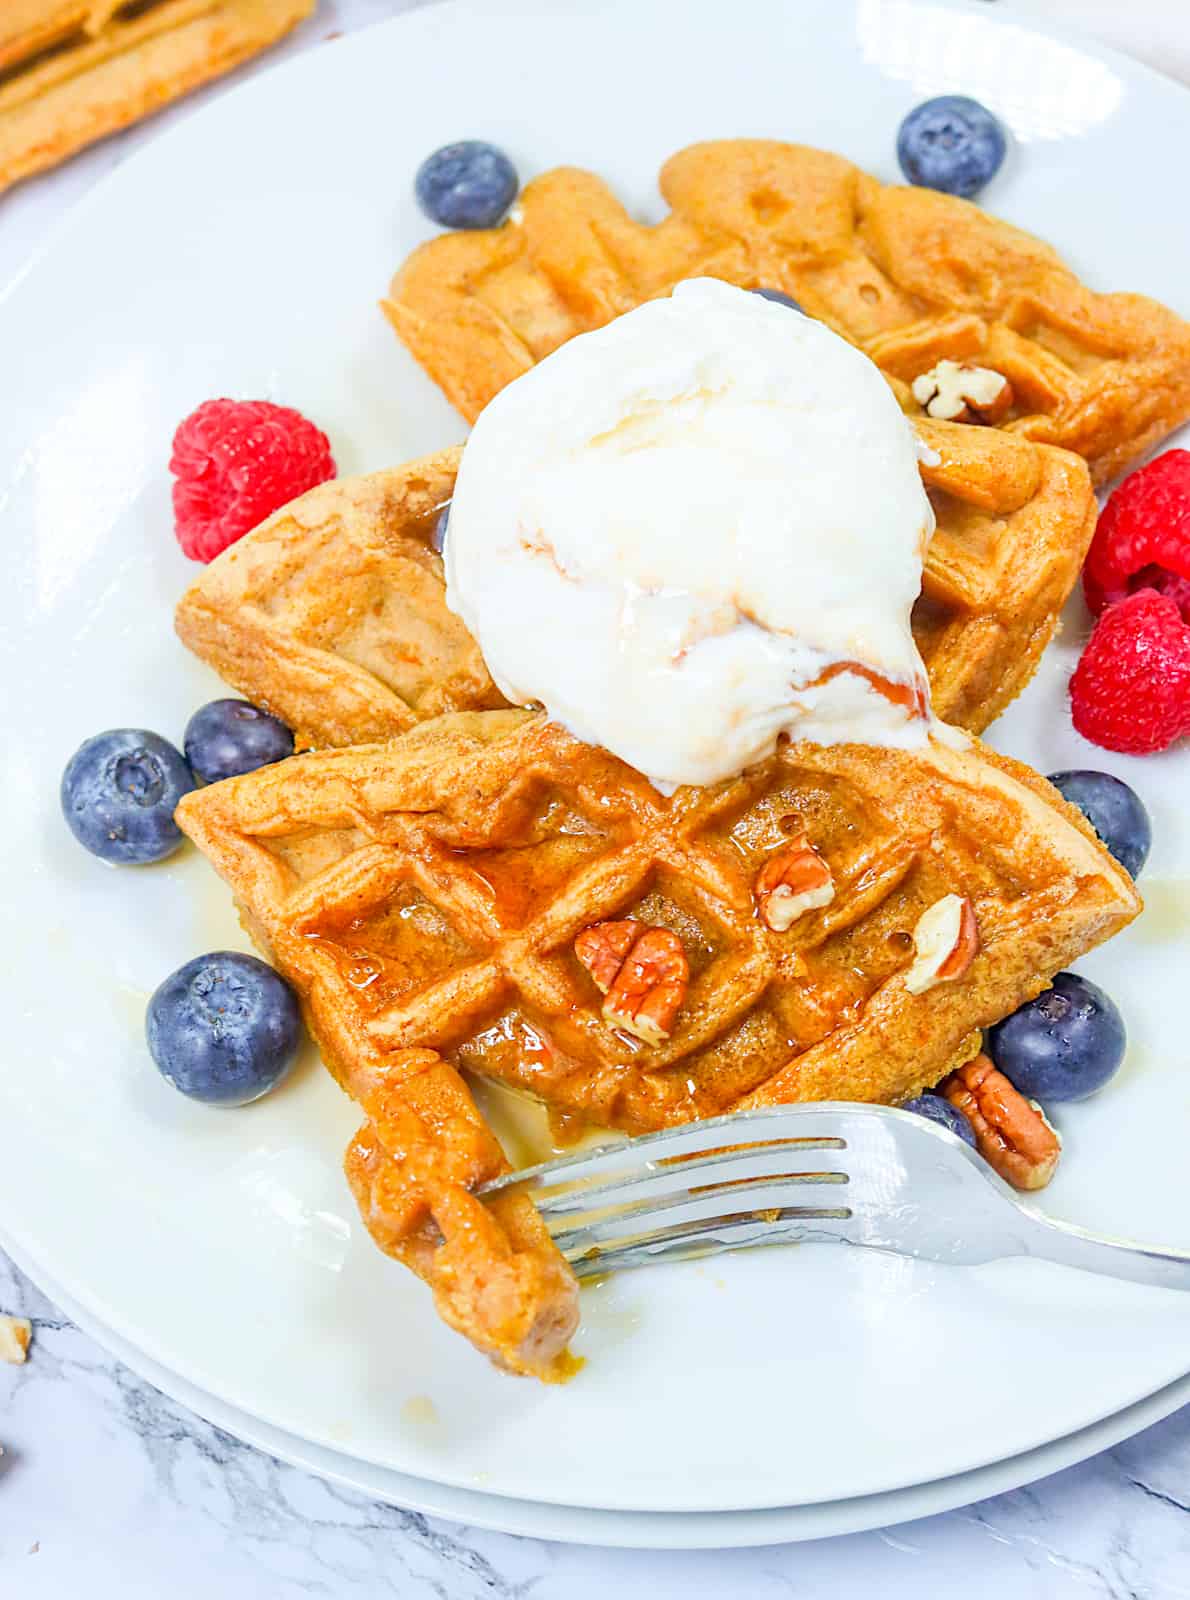 Diving into insanely delicious sweet potato waffles with vanilla ice cream and berries